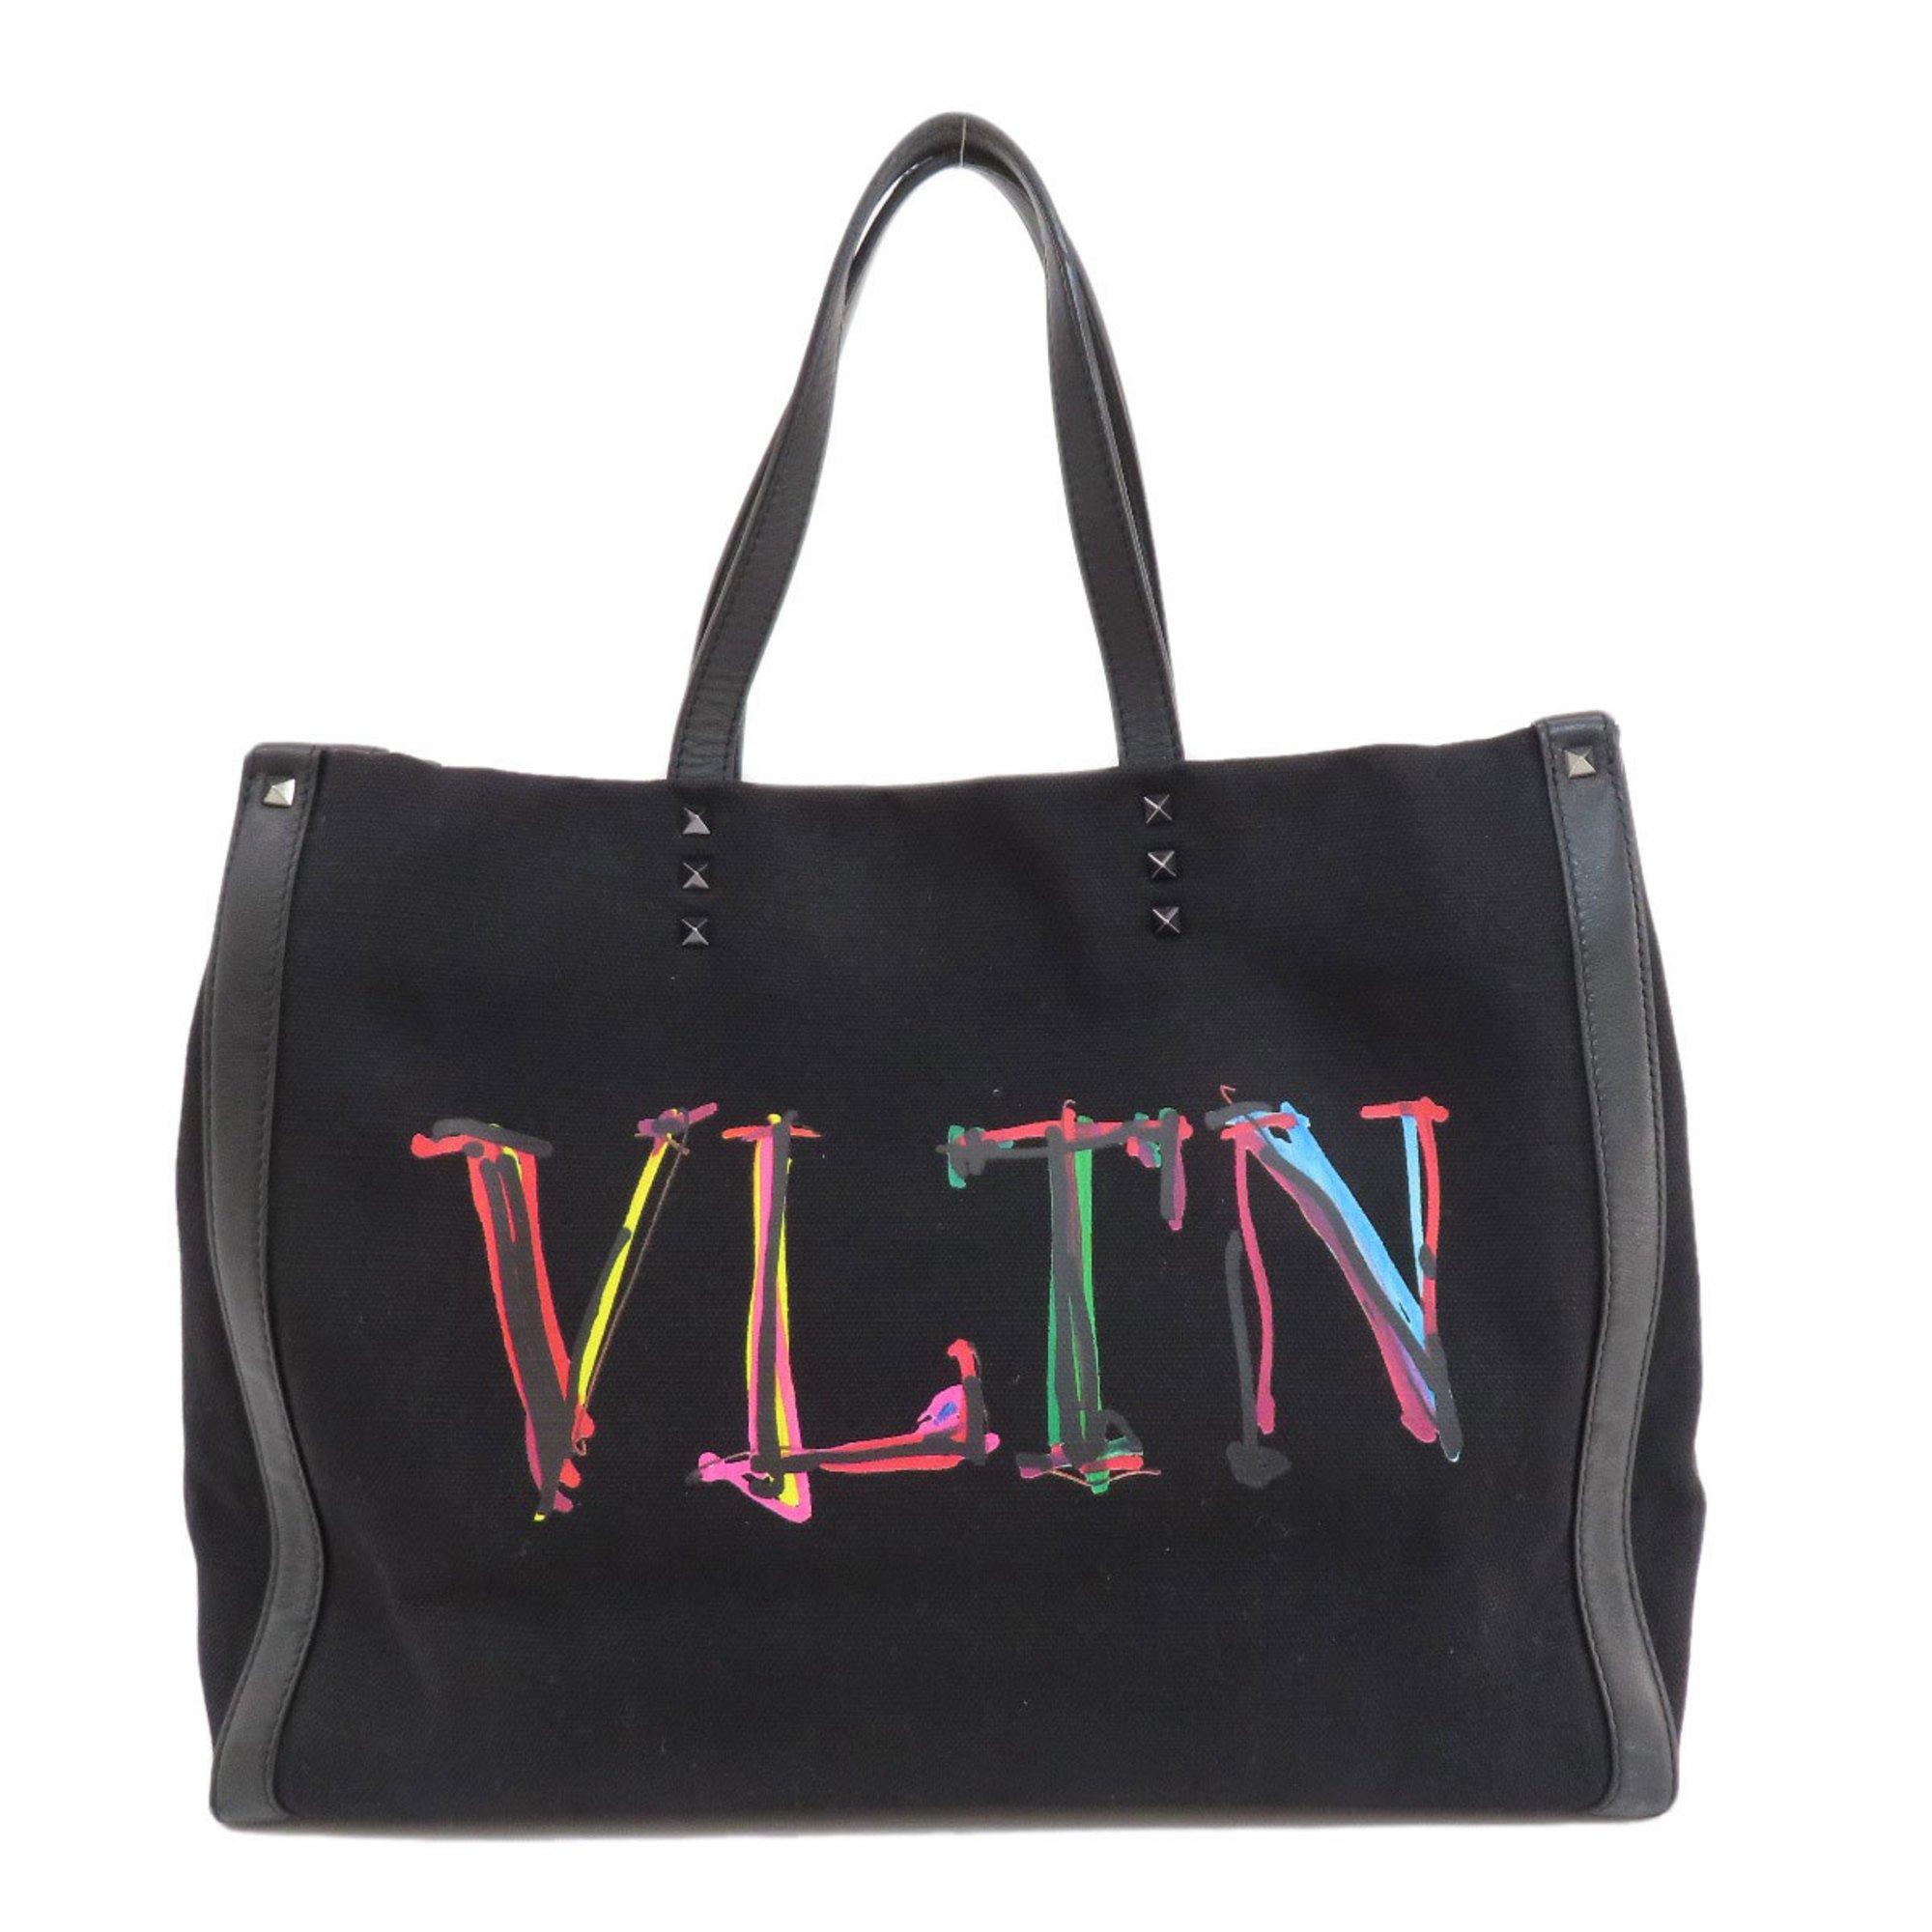 Valentino Paint Tote Bag Canvas Women's